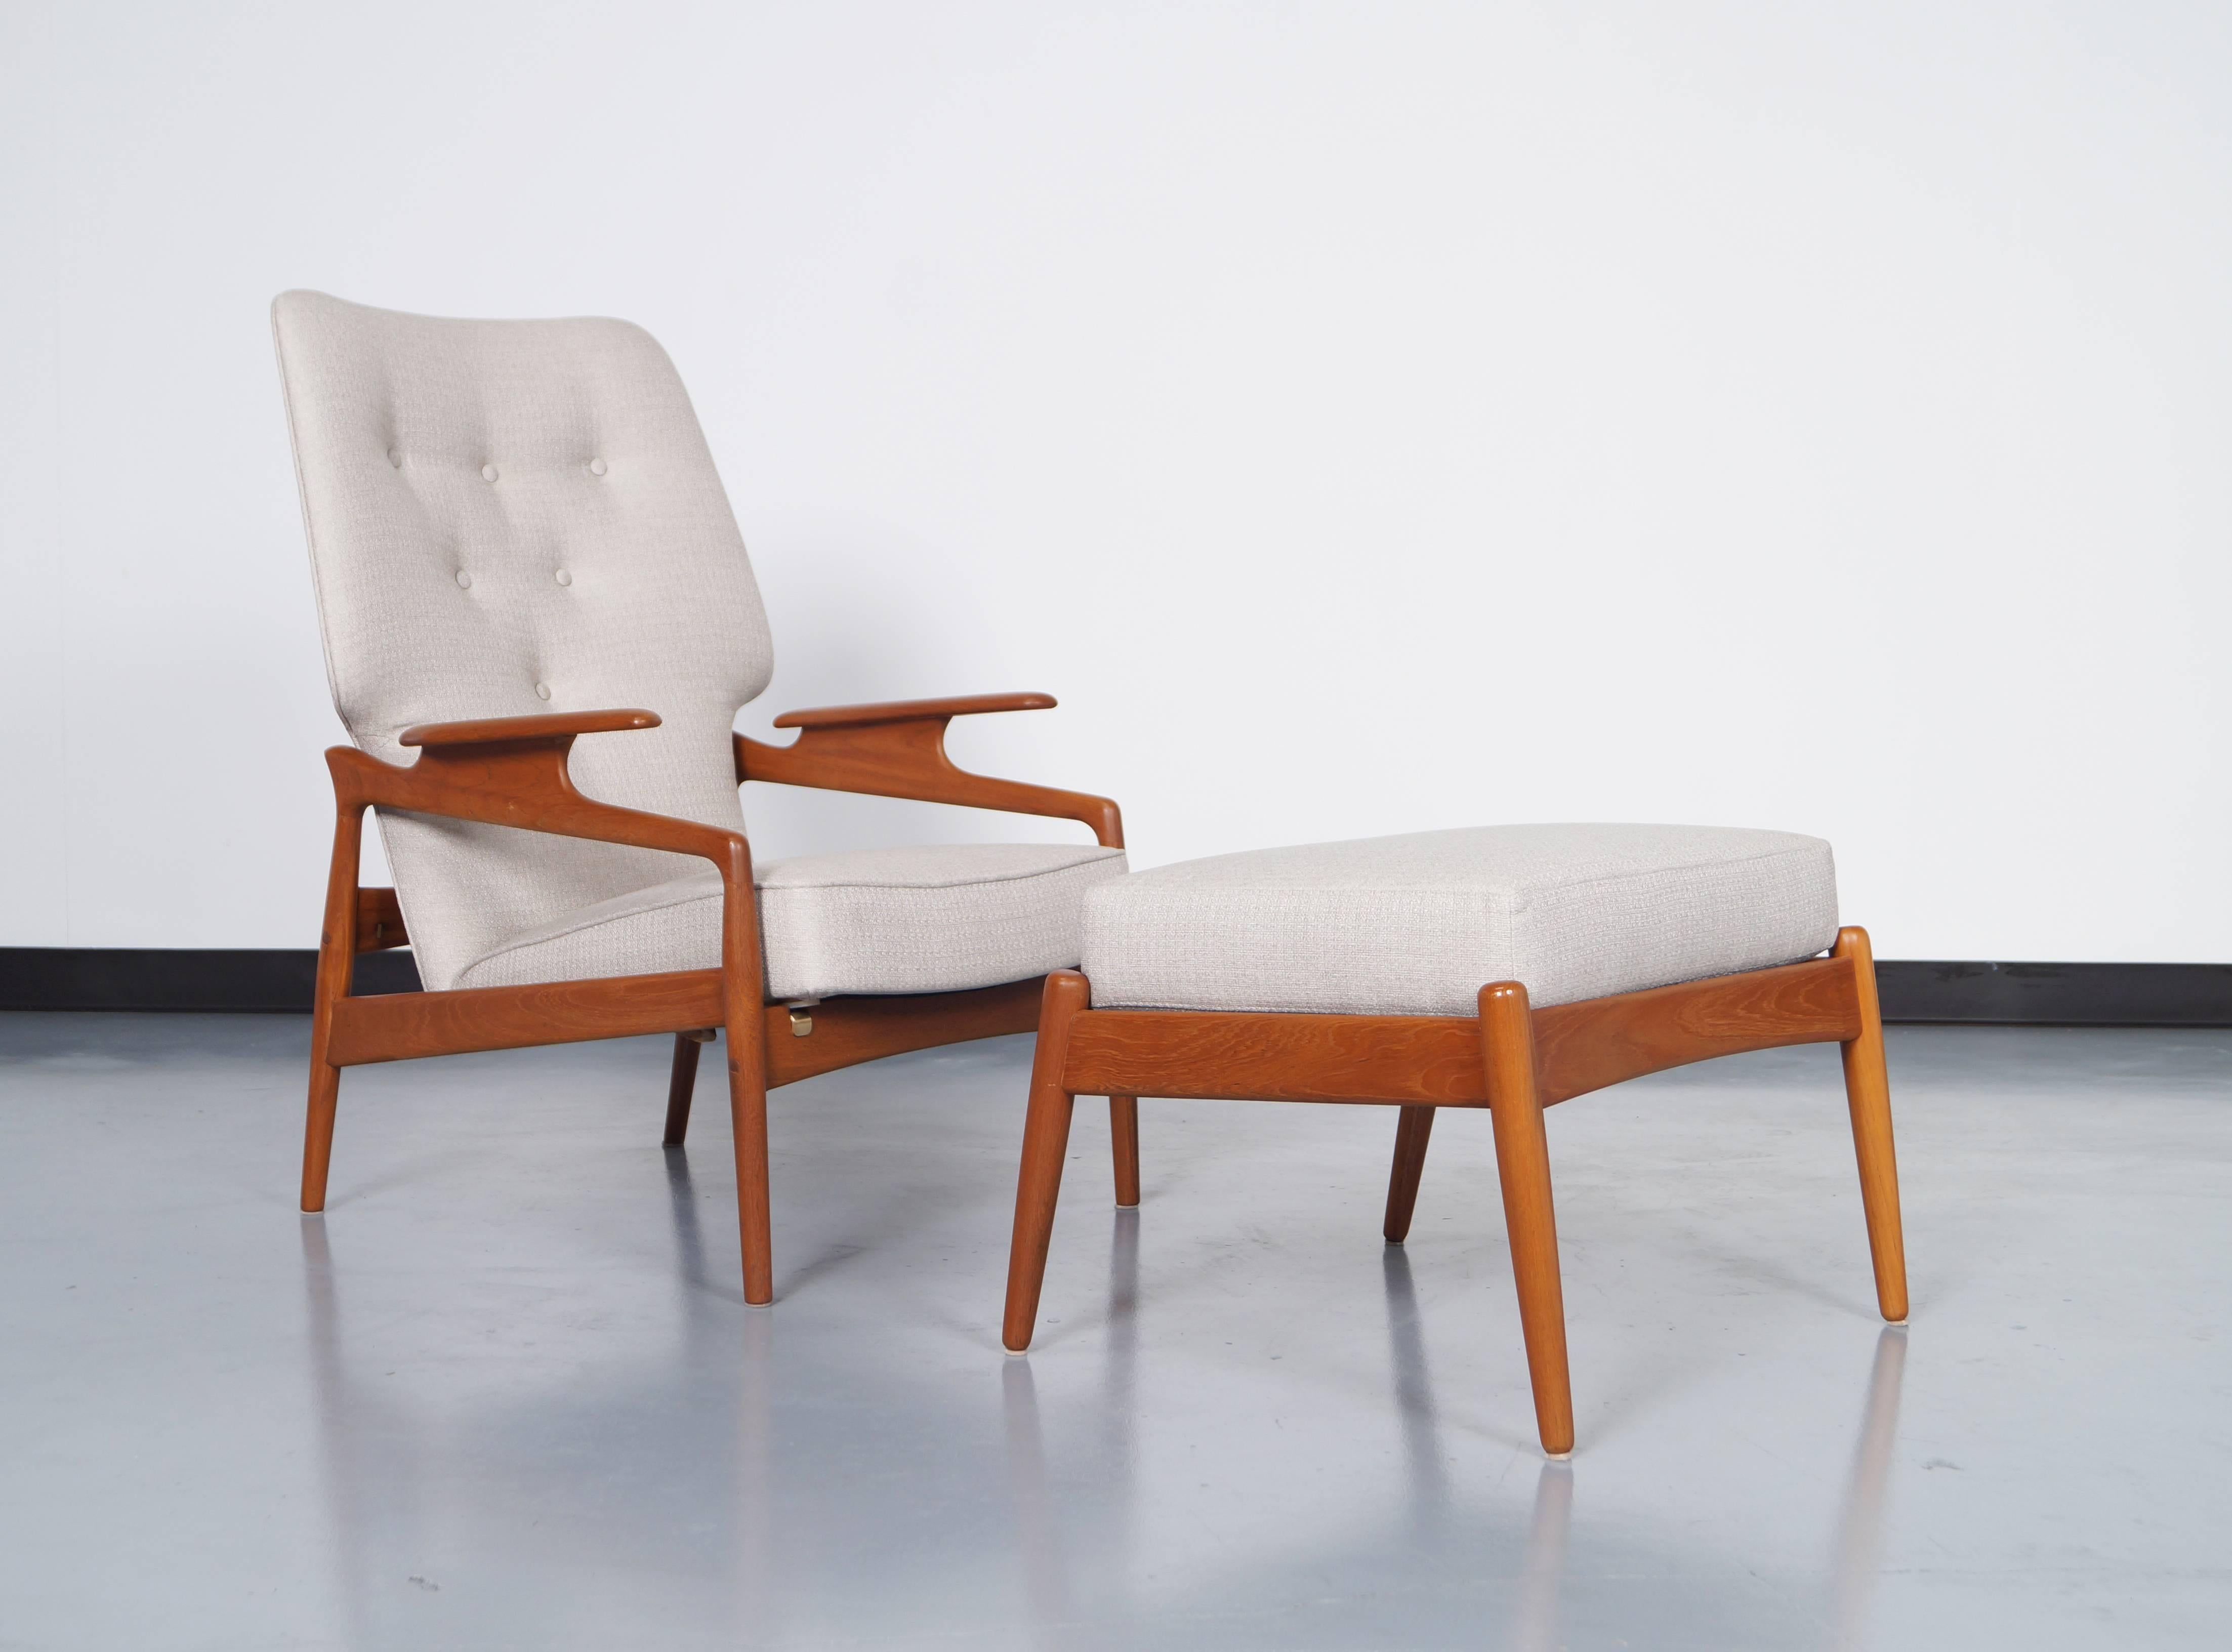 Danish teak reclining lounge chair and ottoman in the manner of Finn Juhl. Amazing sculpted armrests and newly reupholstered. The chair reclines to 45 degrees.

Dimensions for ottoman: 25.25